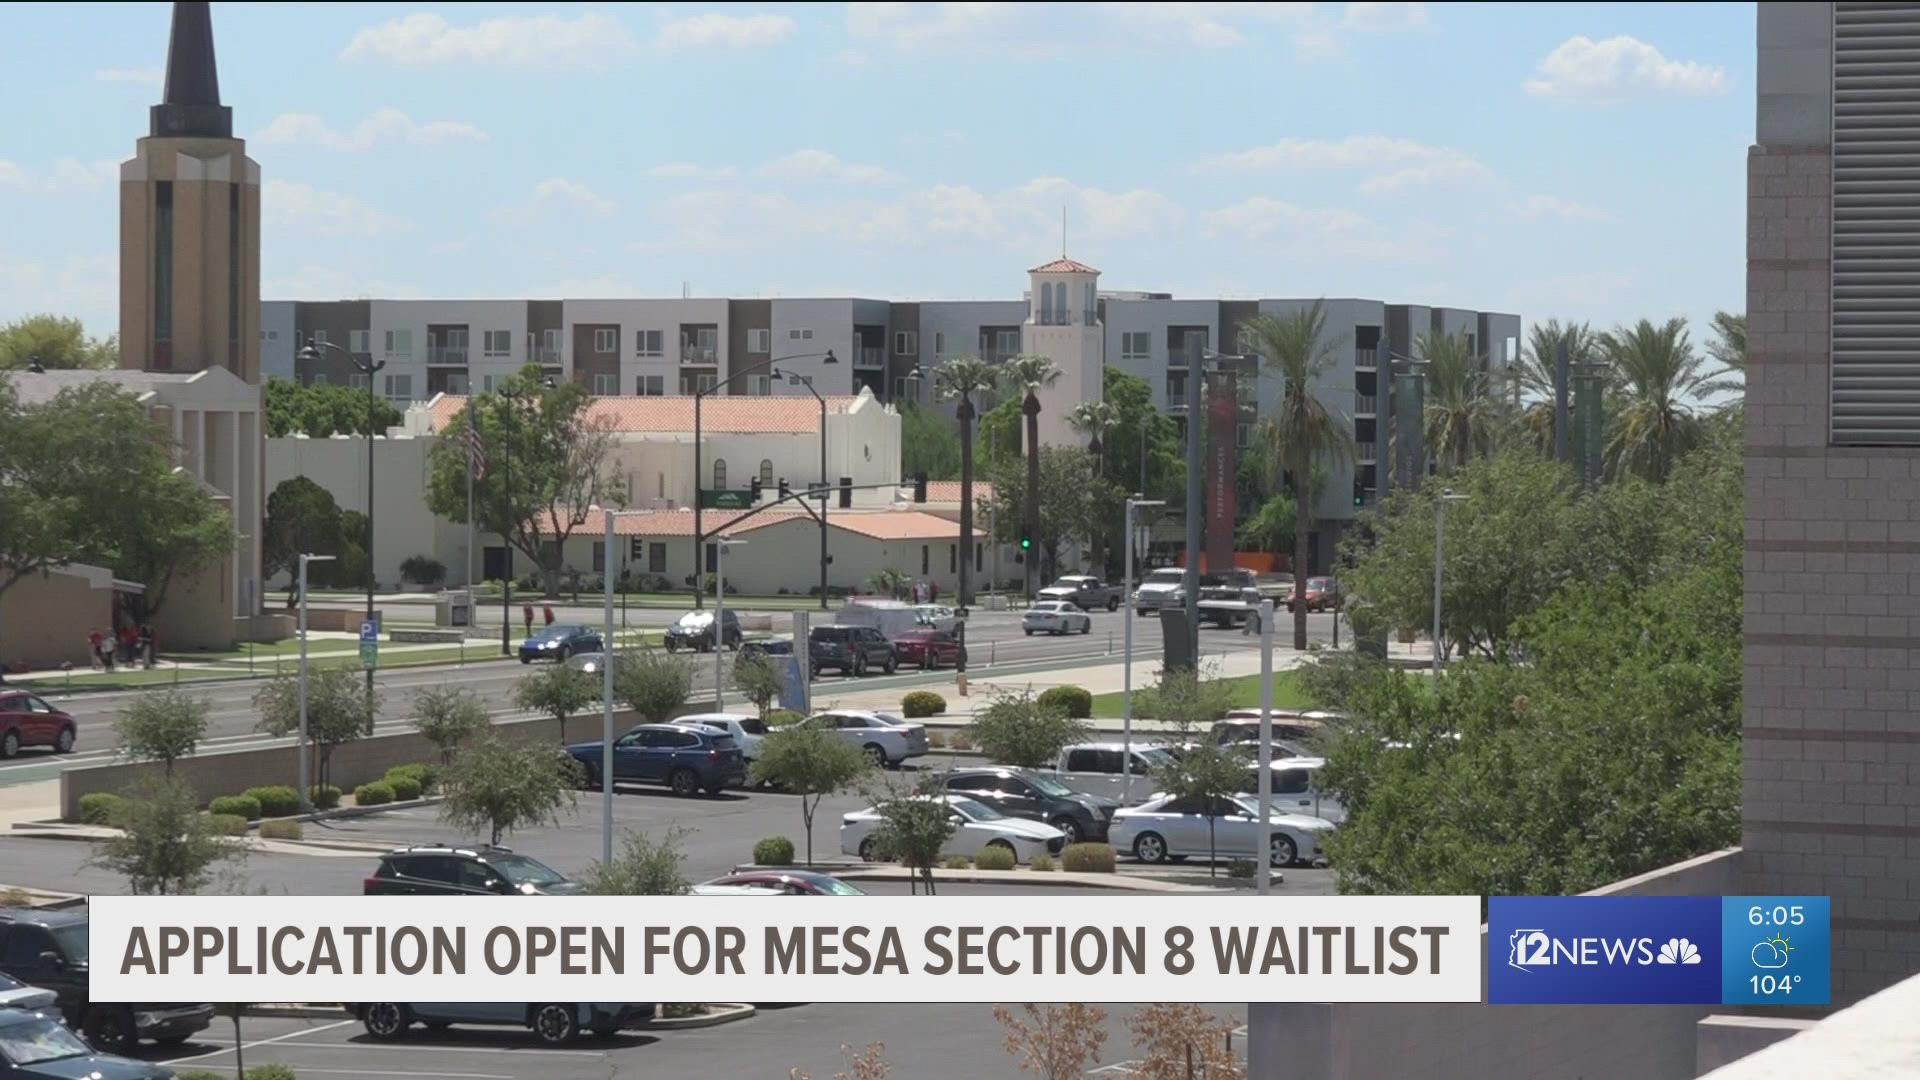 For the first time since 2016, Mesa has begun accepting applications for its Section 8 voucher waitlist. The city's already gotten more applicants than anticipated.